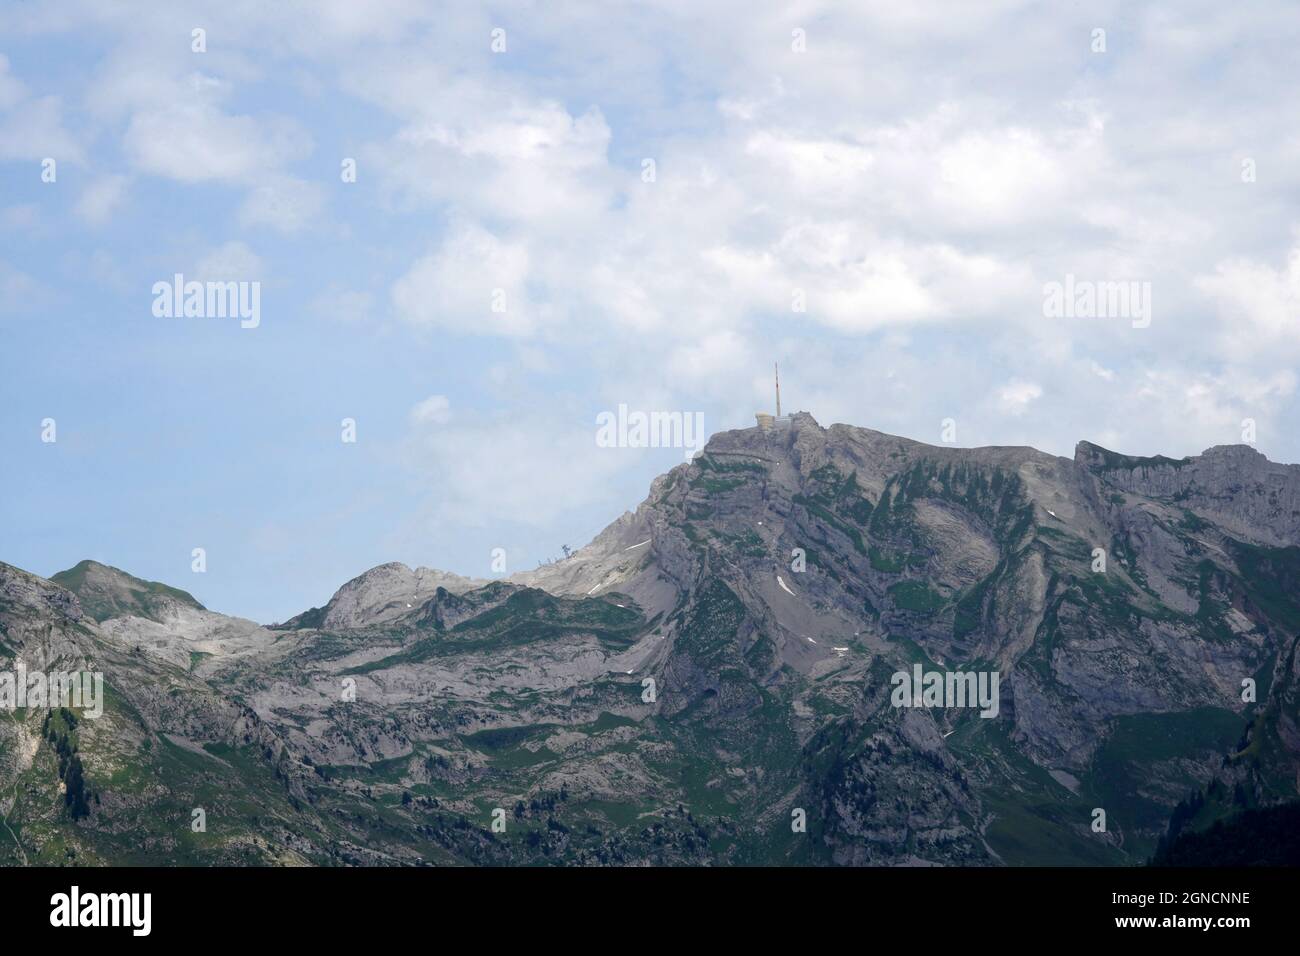 Panoramic view of Saentis mountain in Switzerland in summer time. It is an important landmark of the region and one of the highest mountains in Alps. Stock Photo